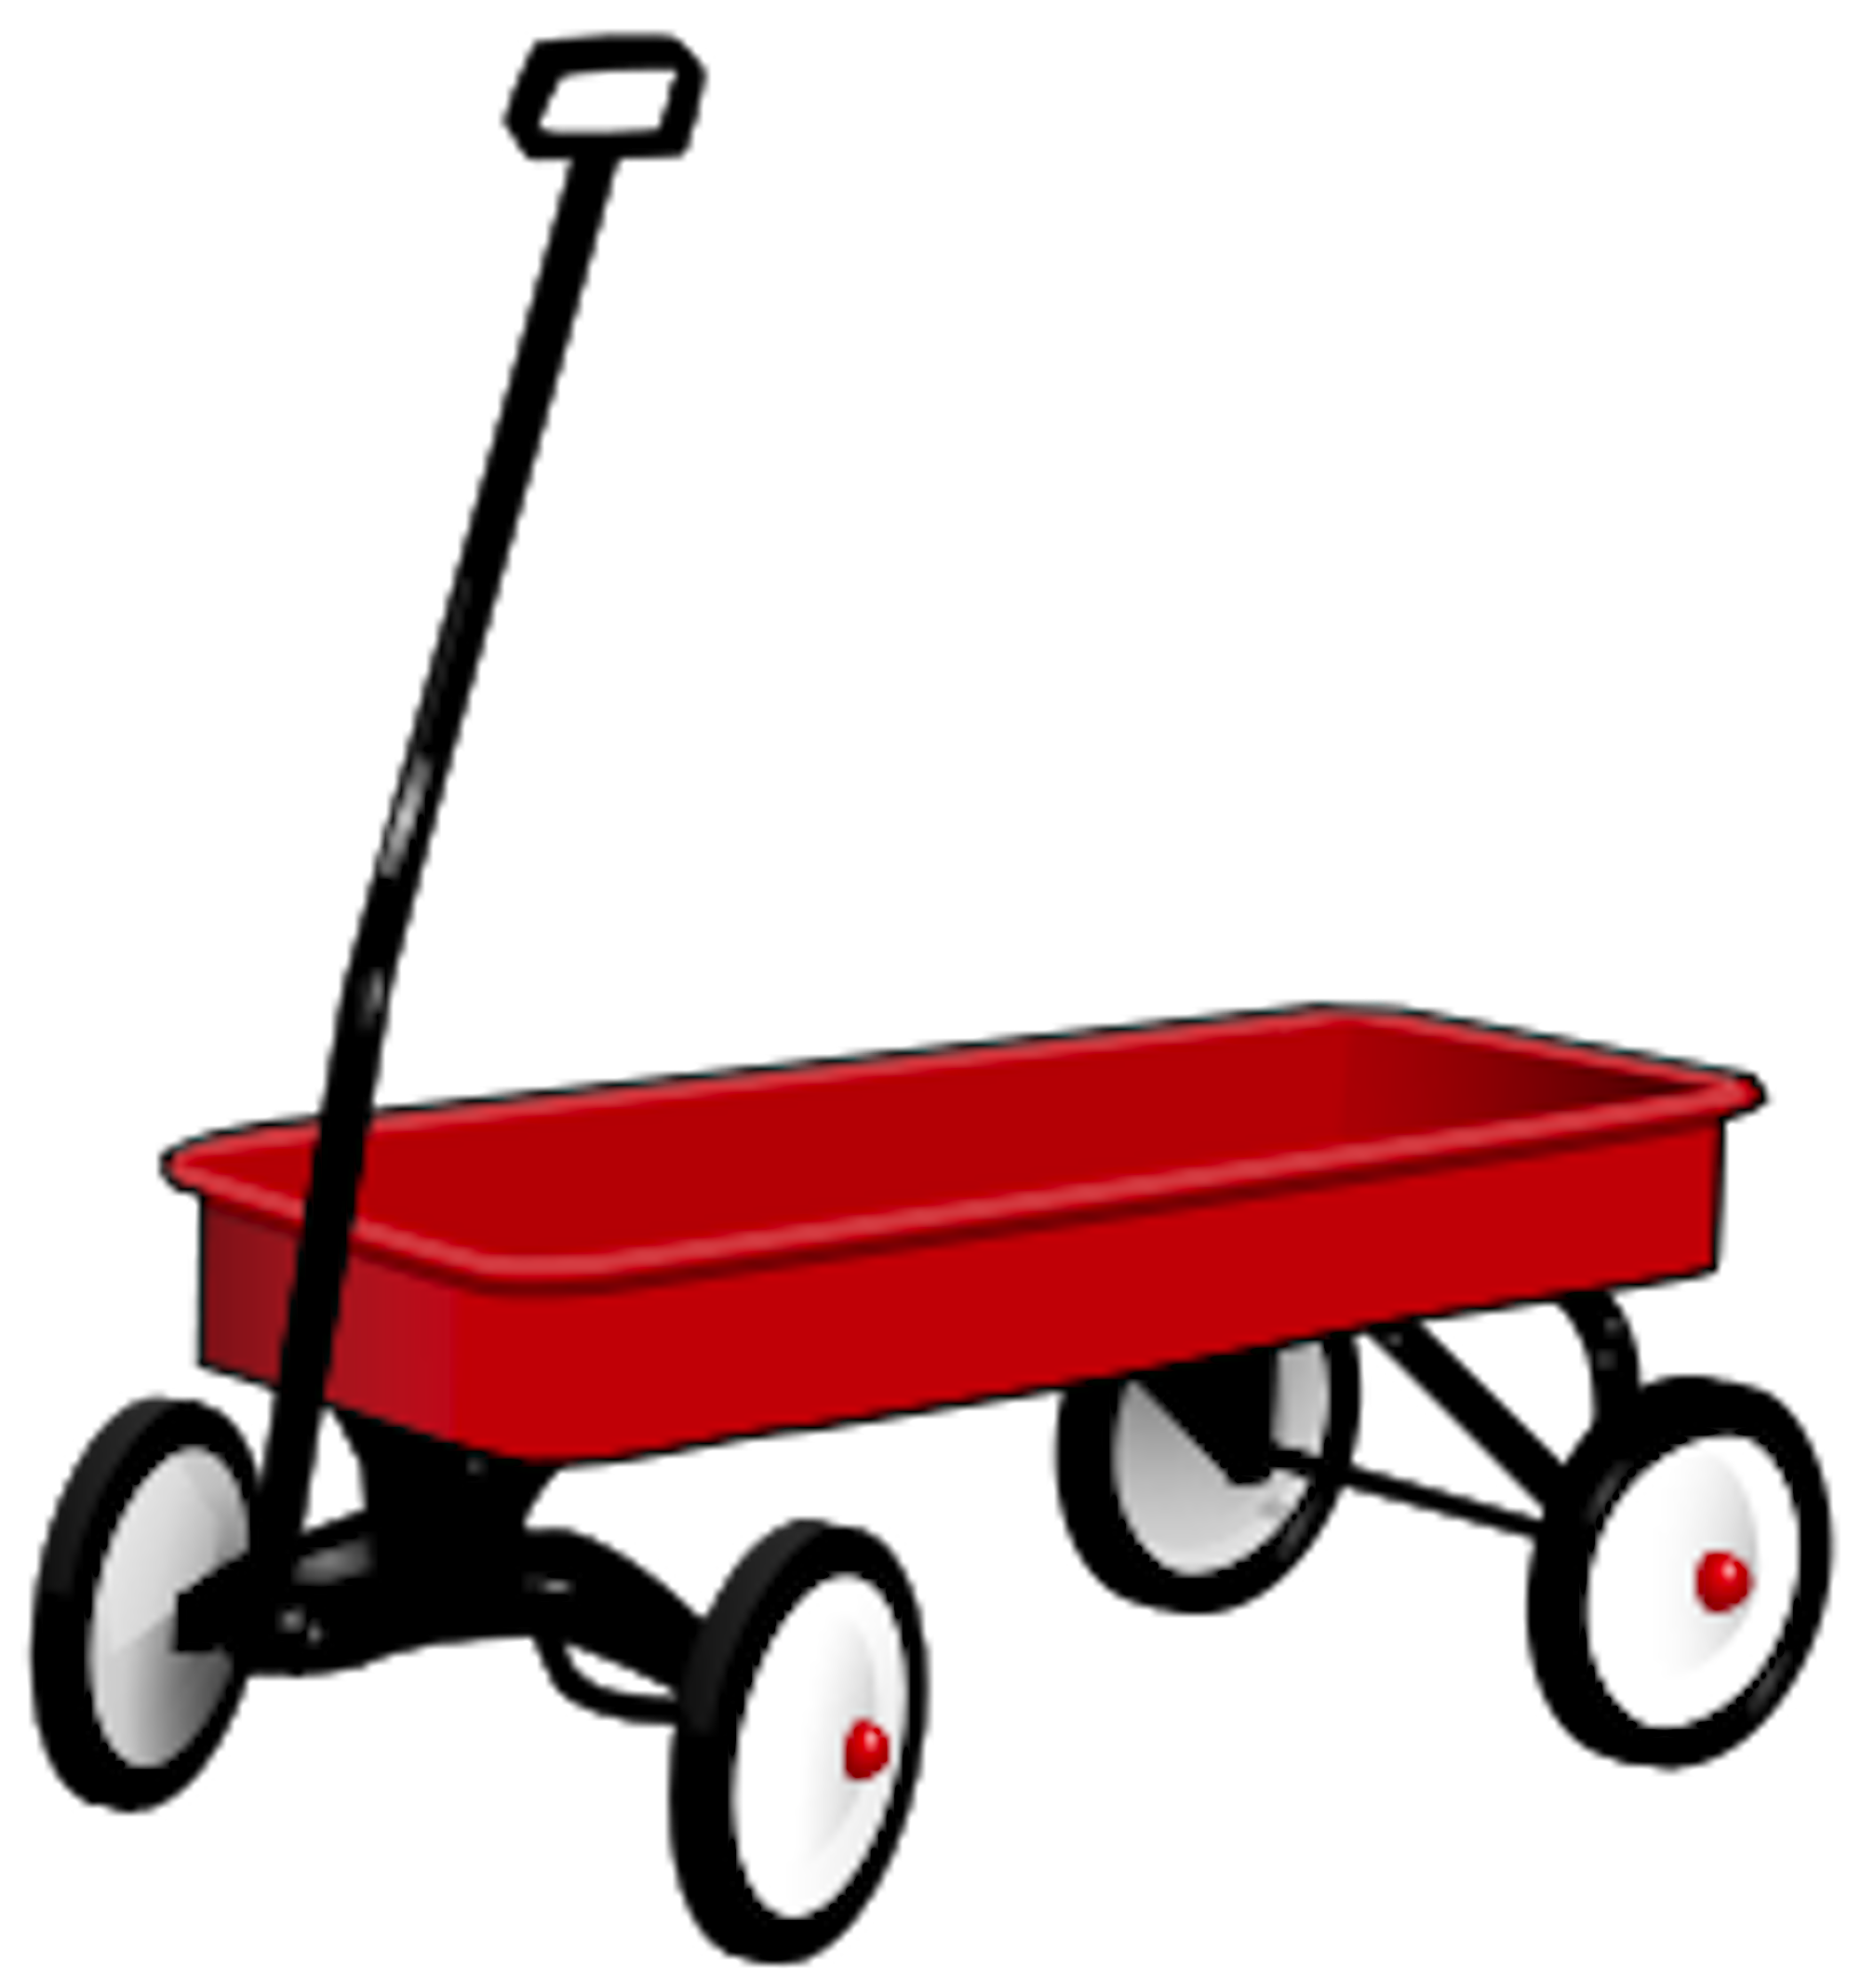 ... Red Wagon Pictures - ClipArt Best ...